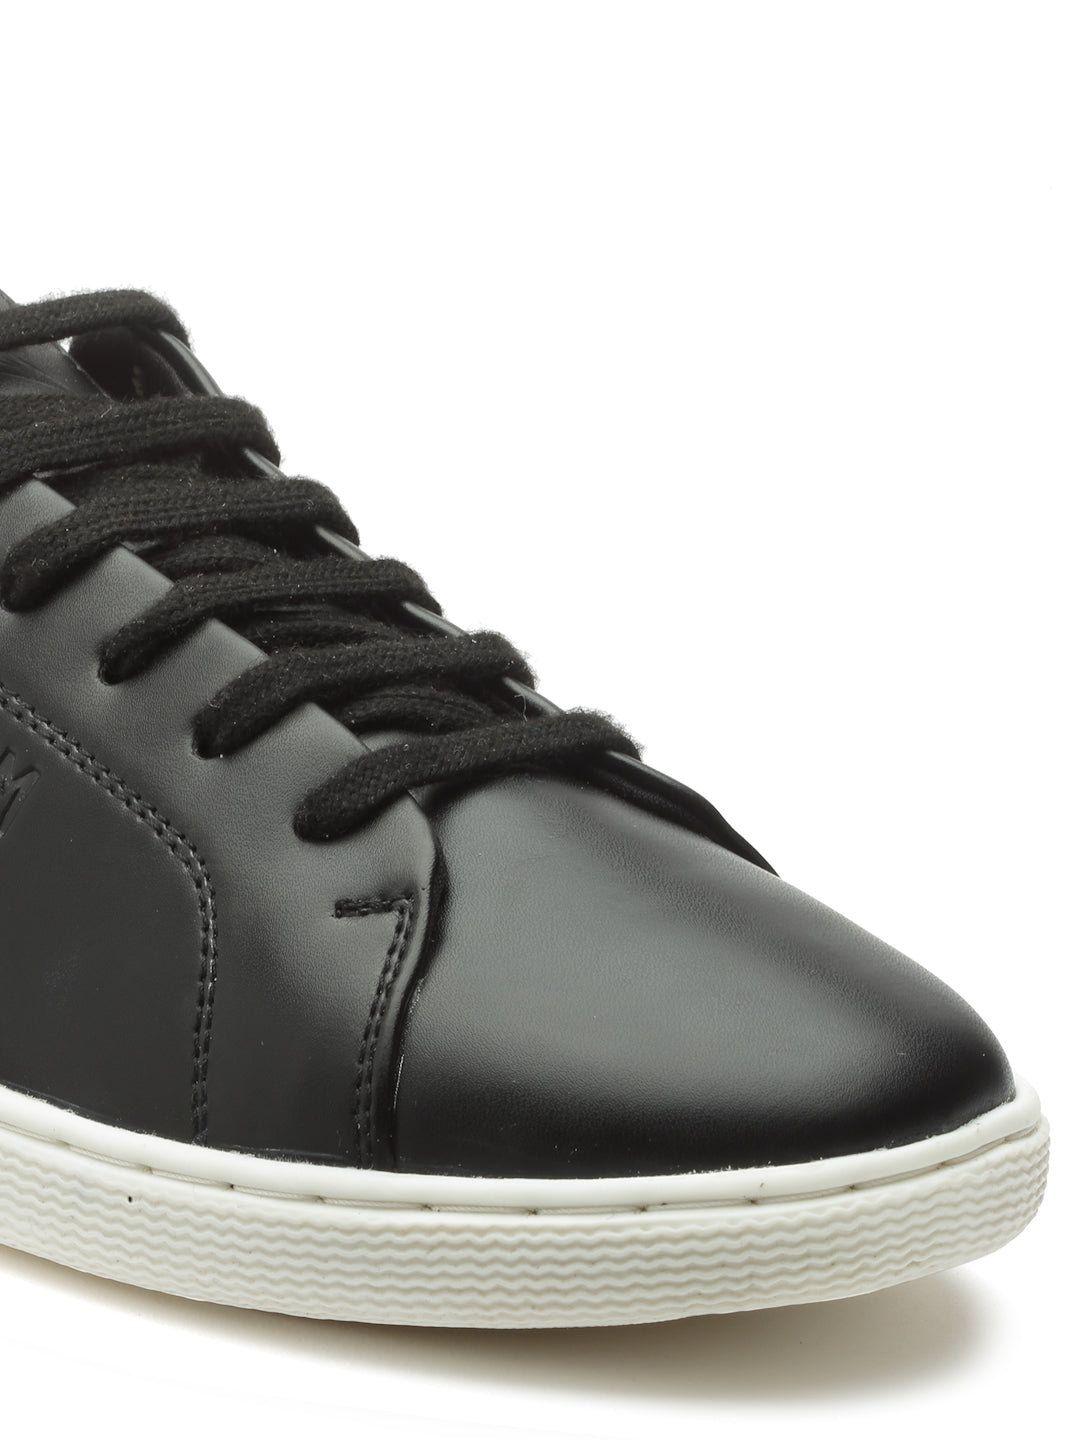 REFOAM Men's Black Synthetic Leather Lace-Up Casual Sneaker